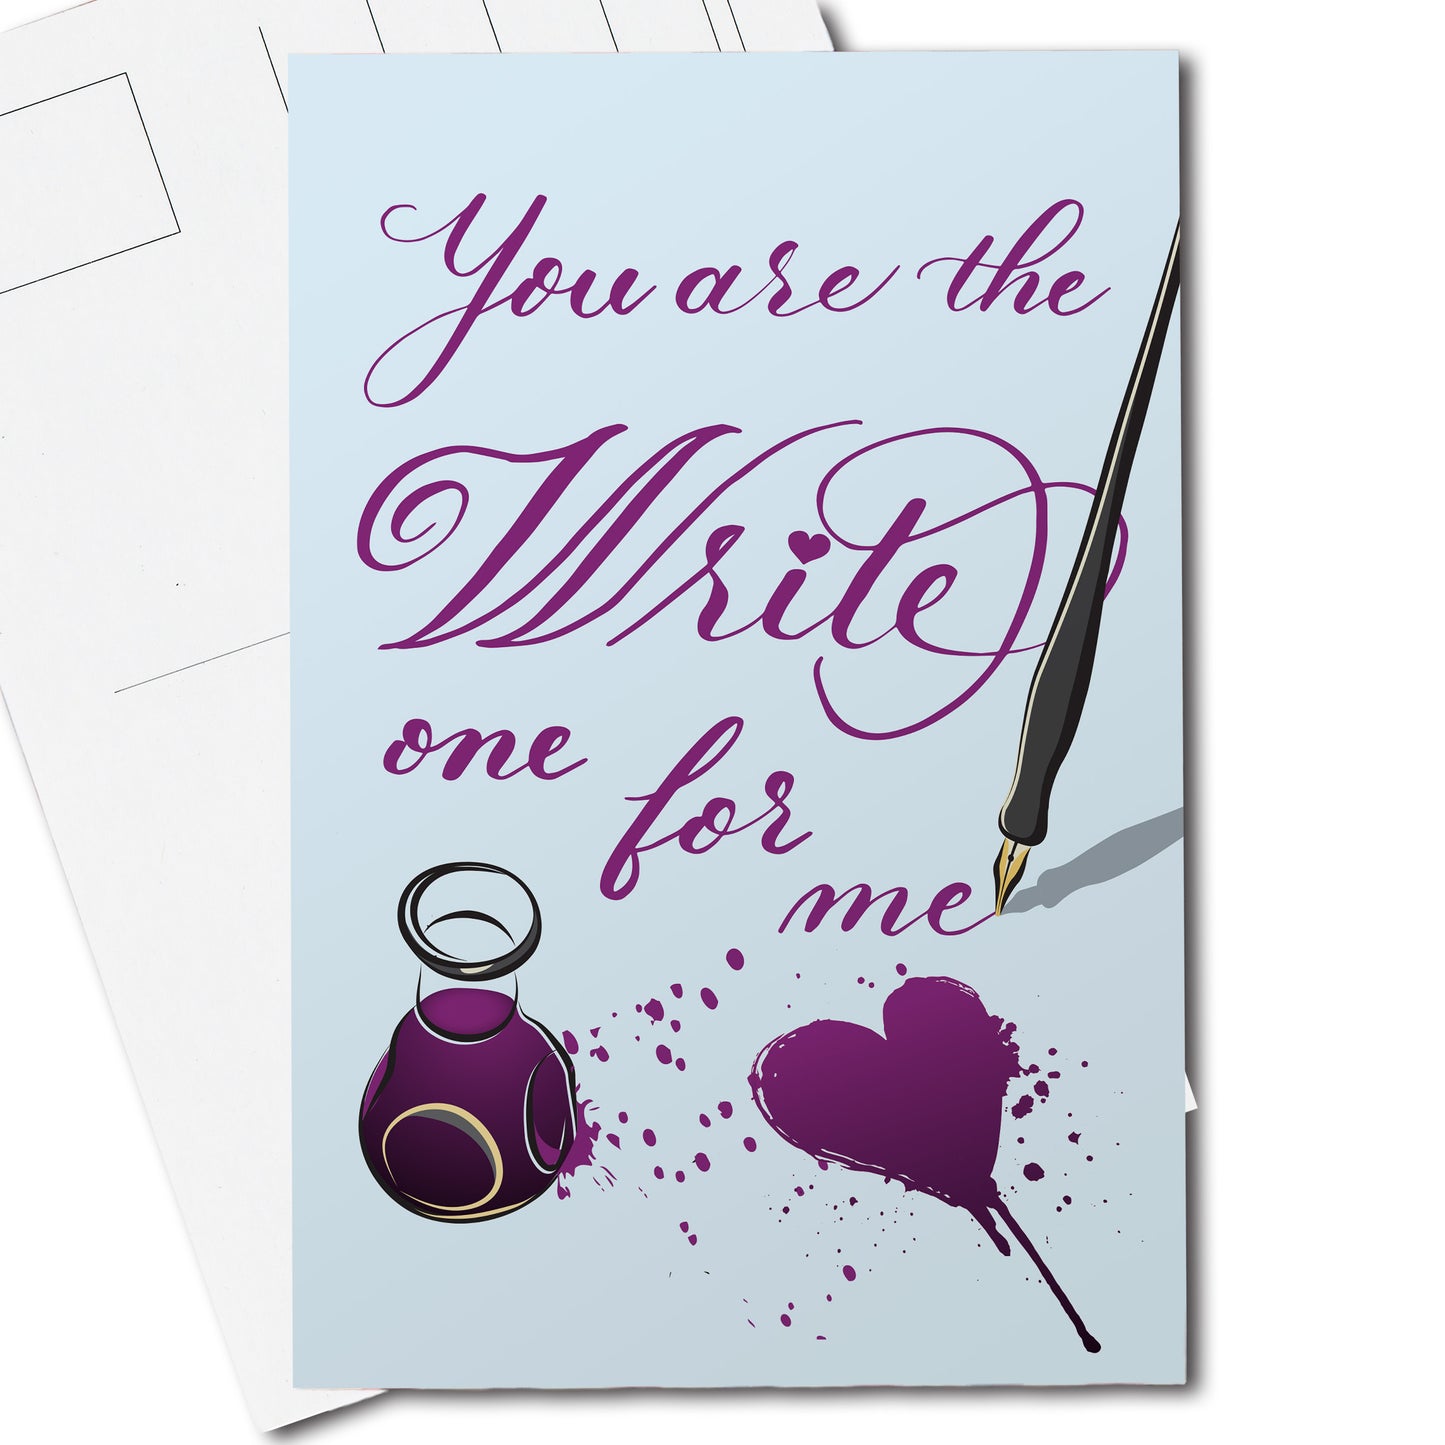 A thumbnail view of the postcard: "You are the Write one for me"